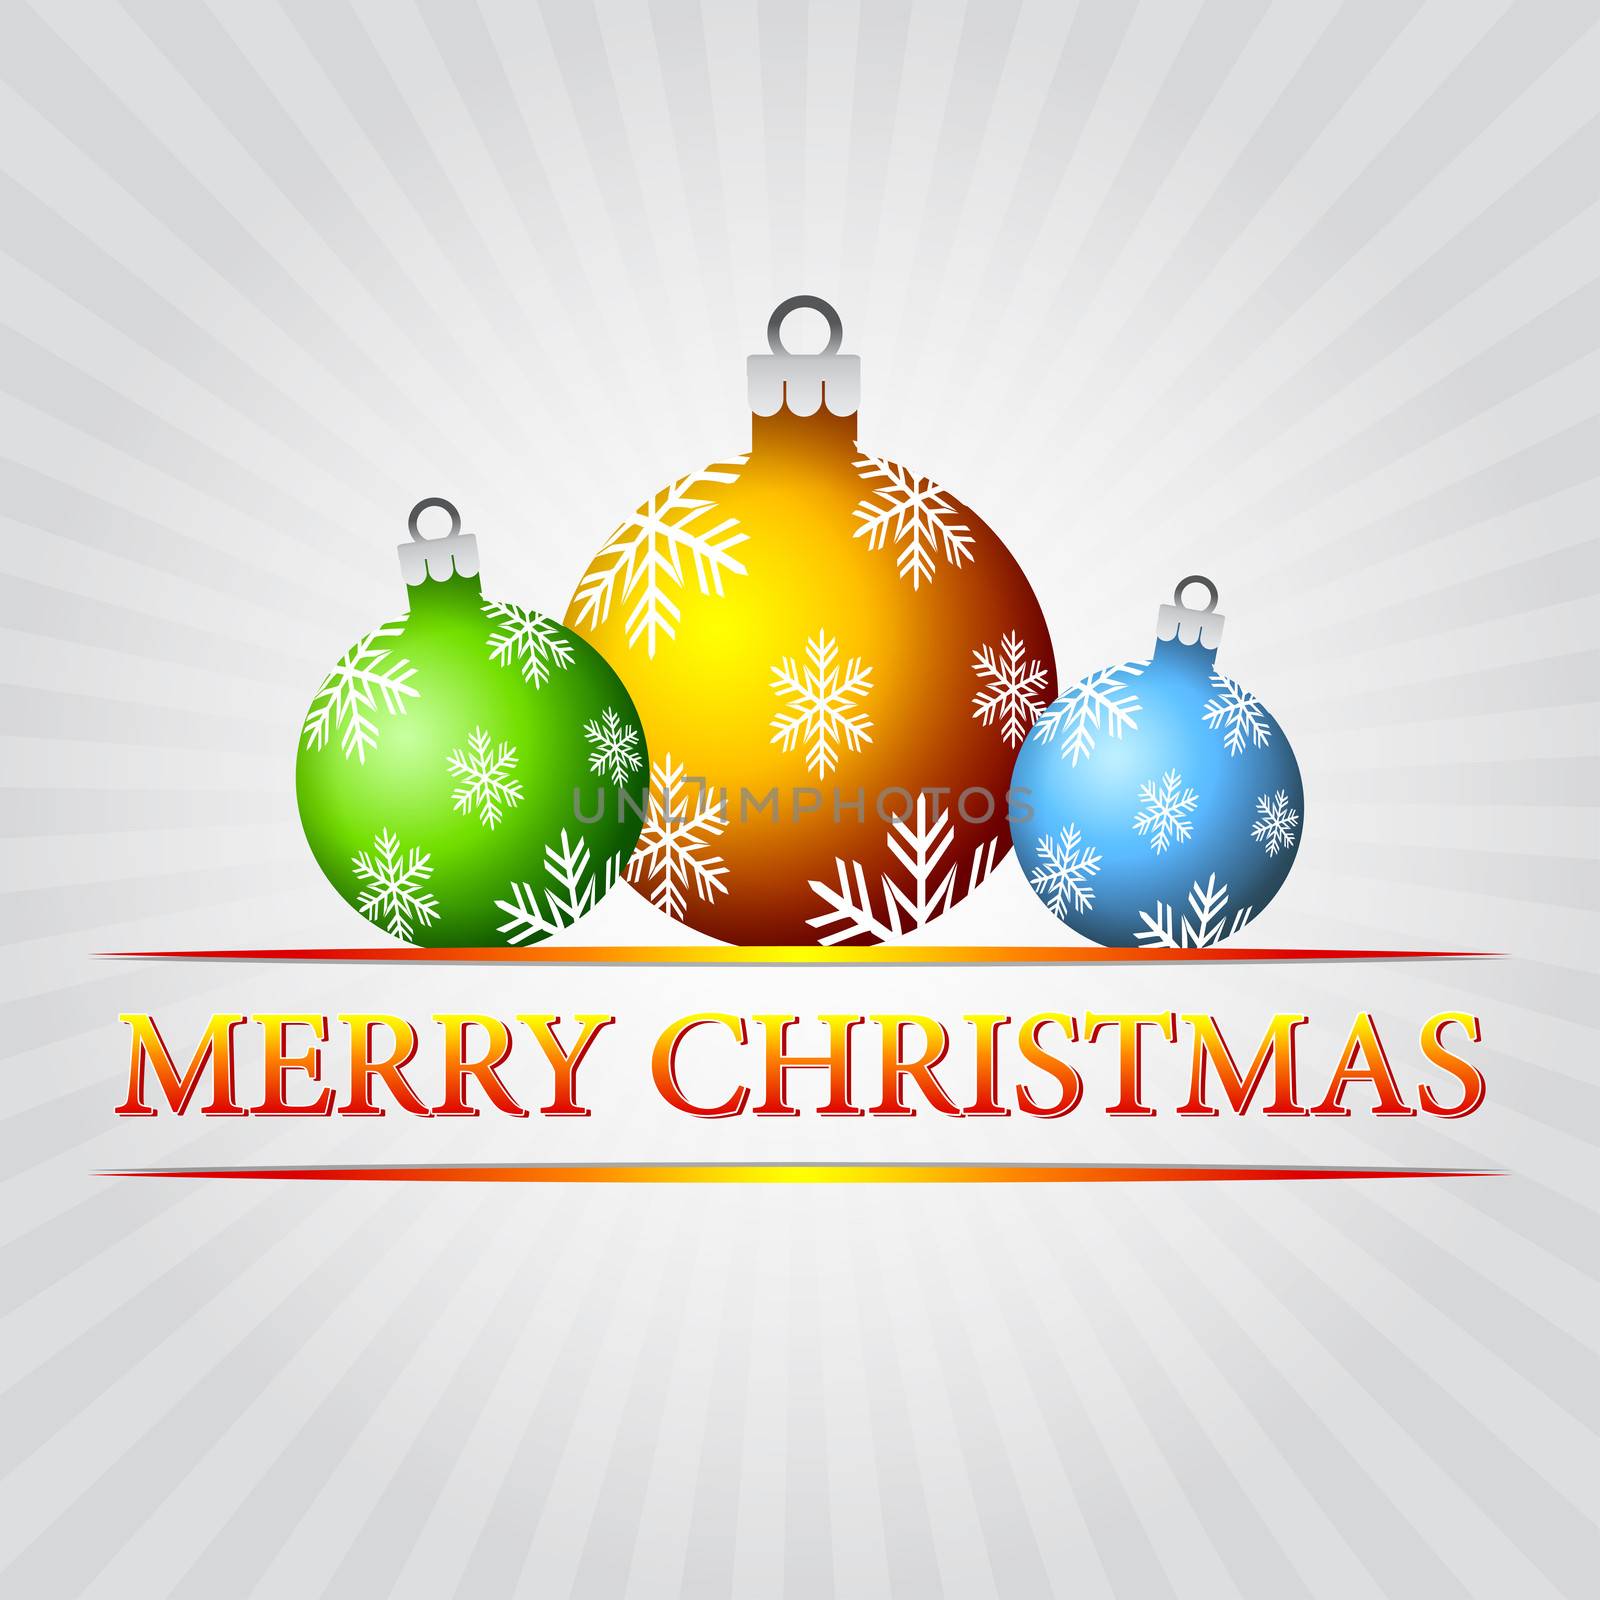 merry christmas - text with colorful christmas balls with snowflakes signs over silver grey rays